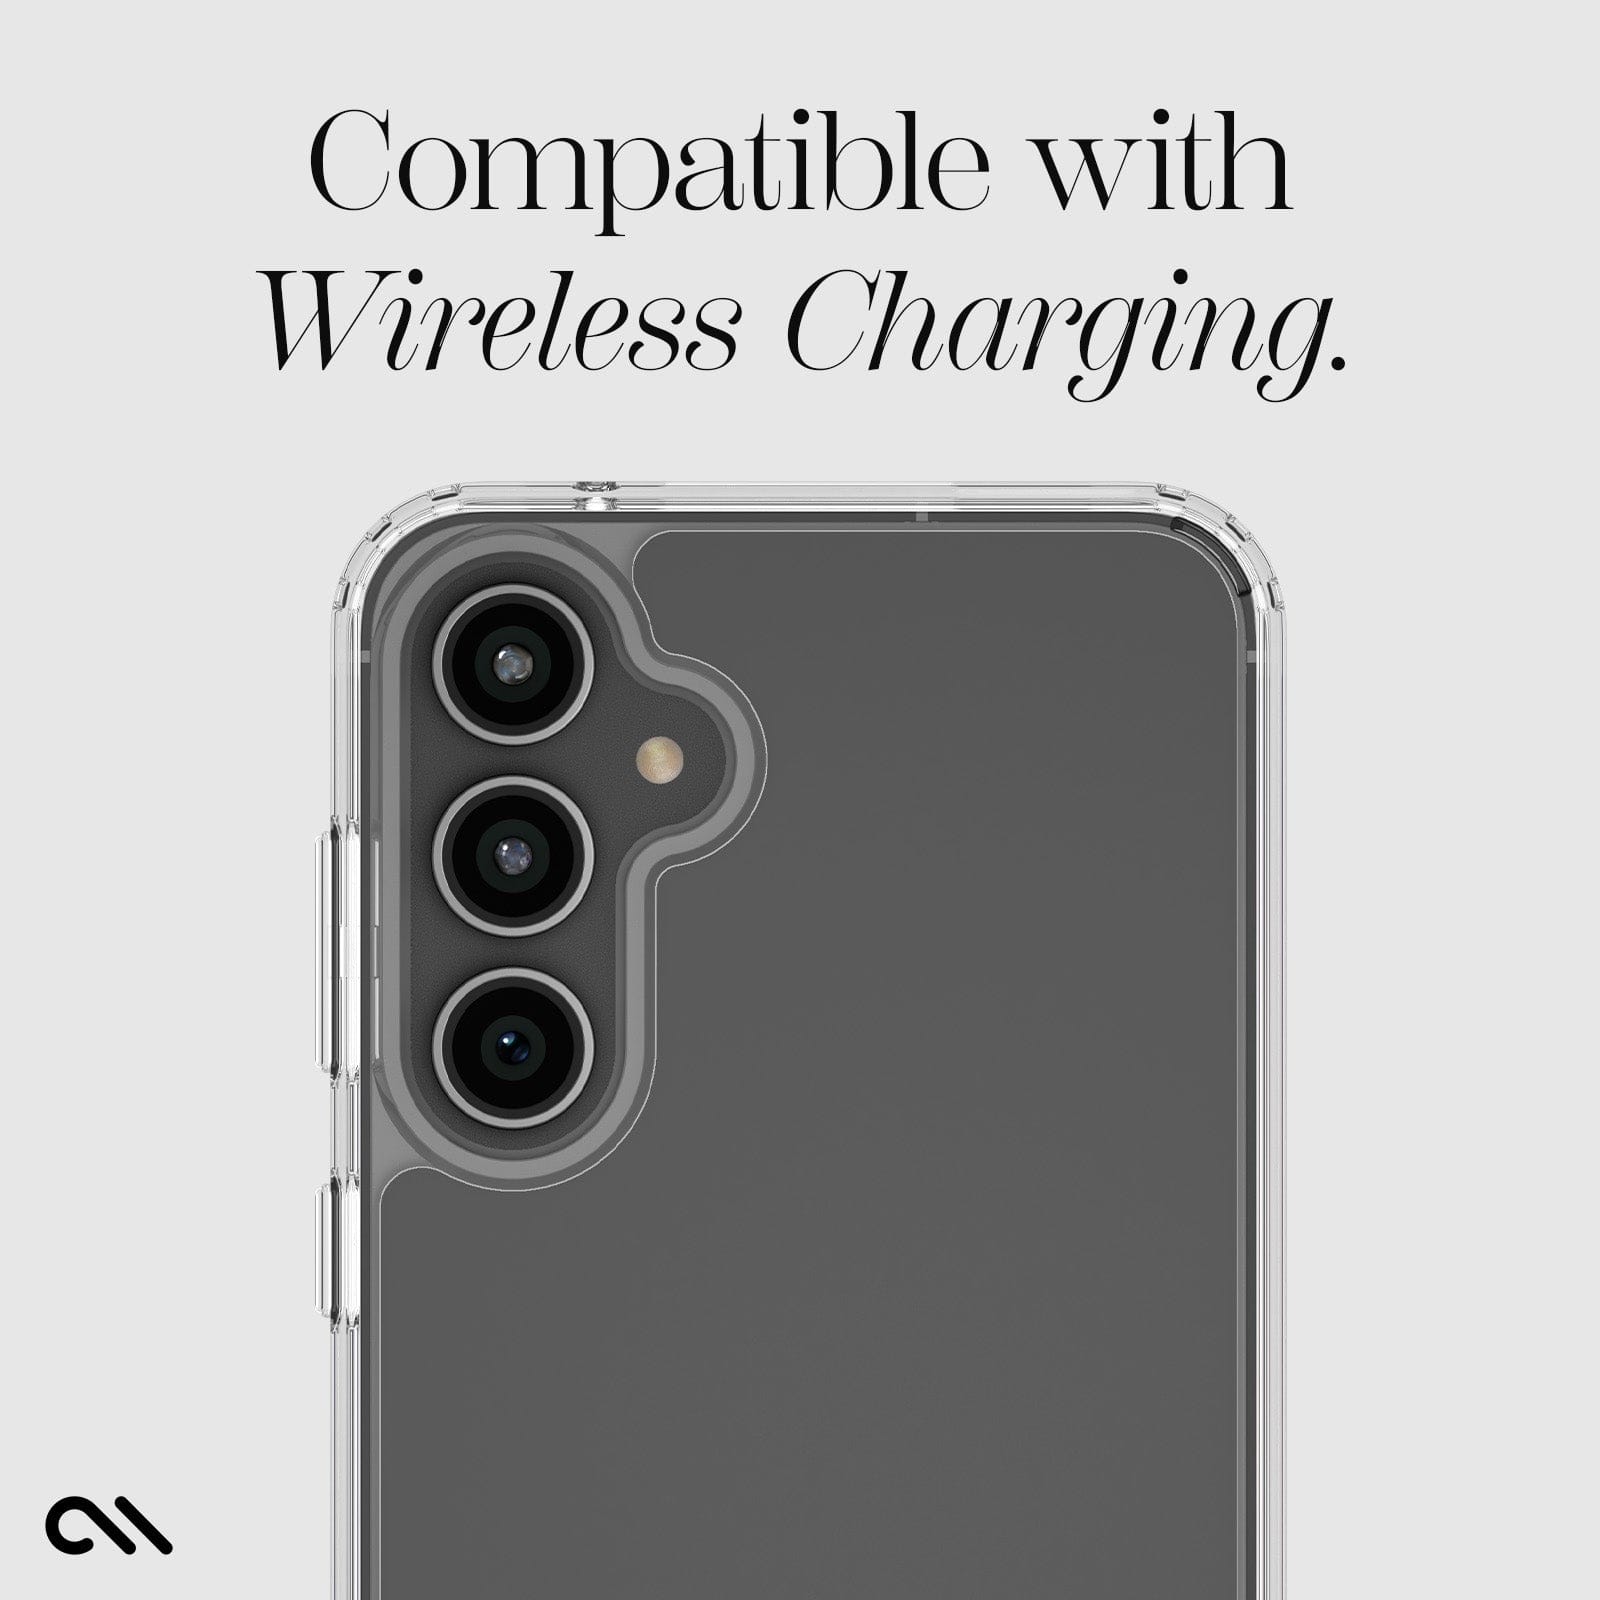 COMPATIBLE WITH WIRELESS CHARGING